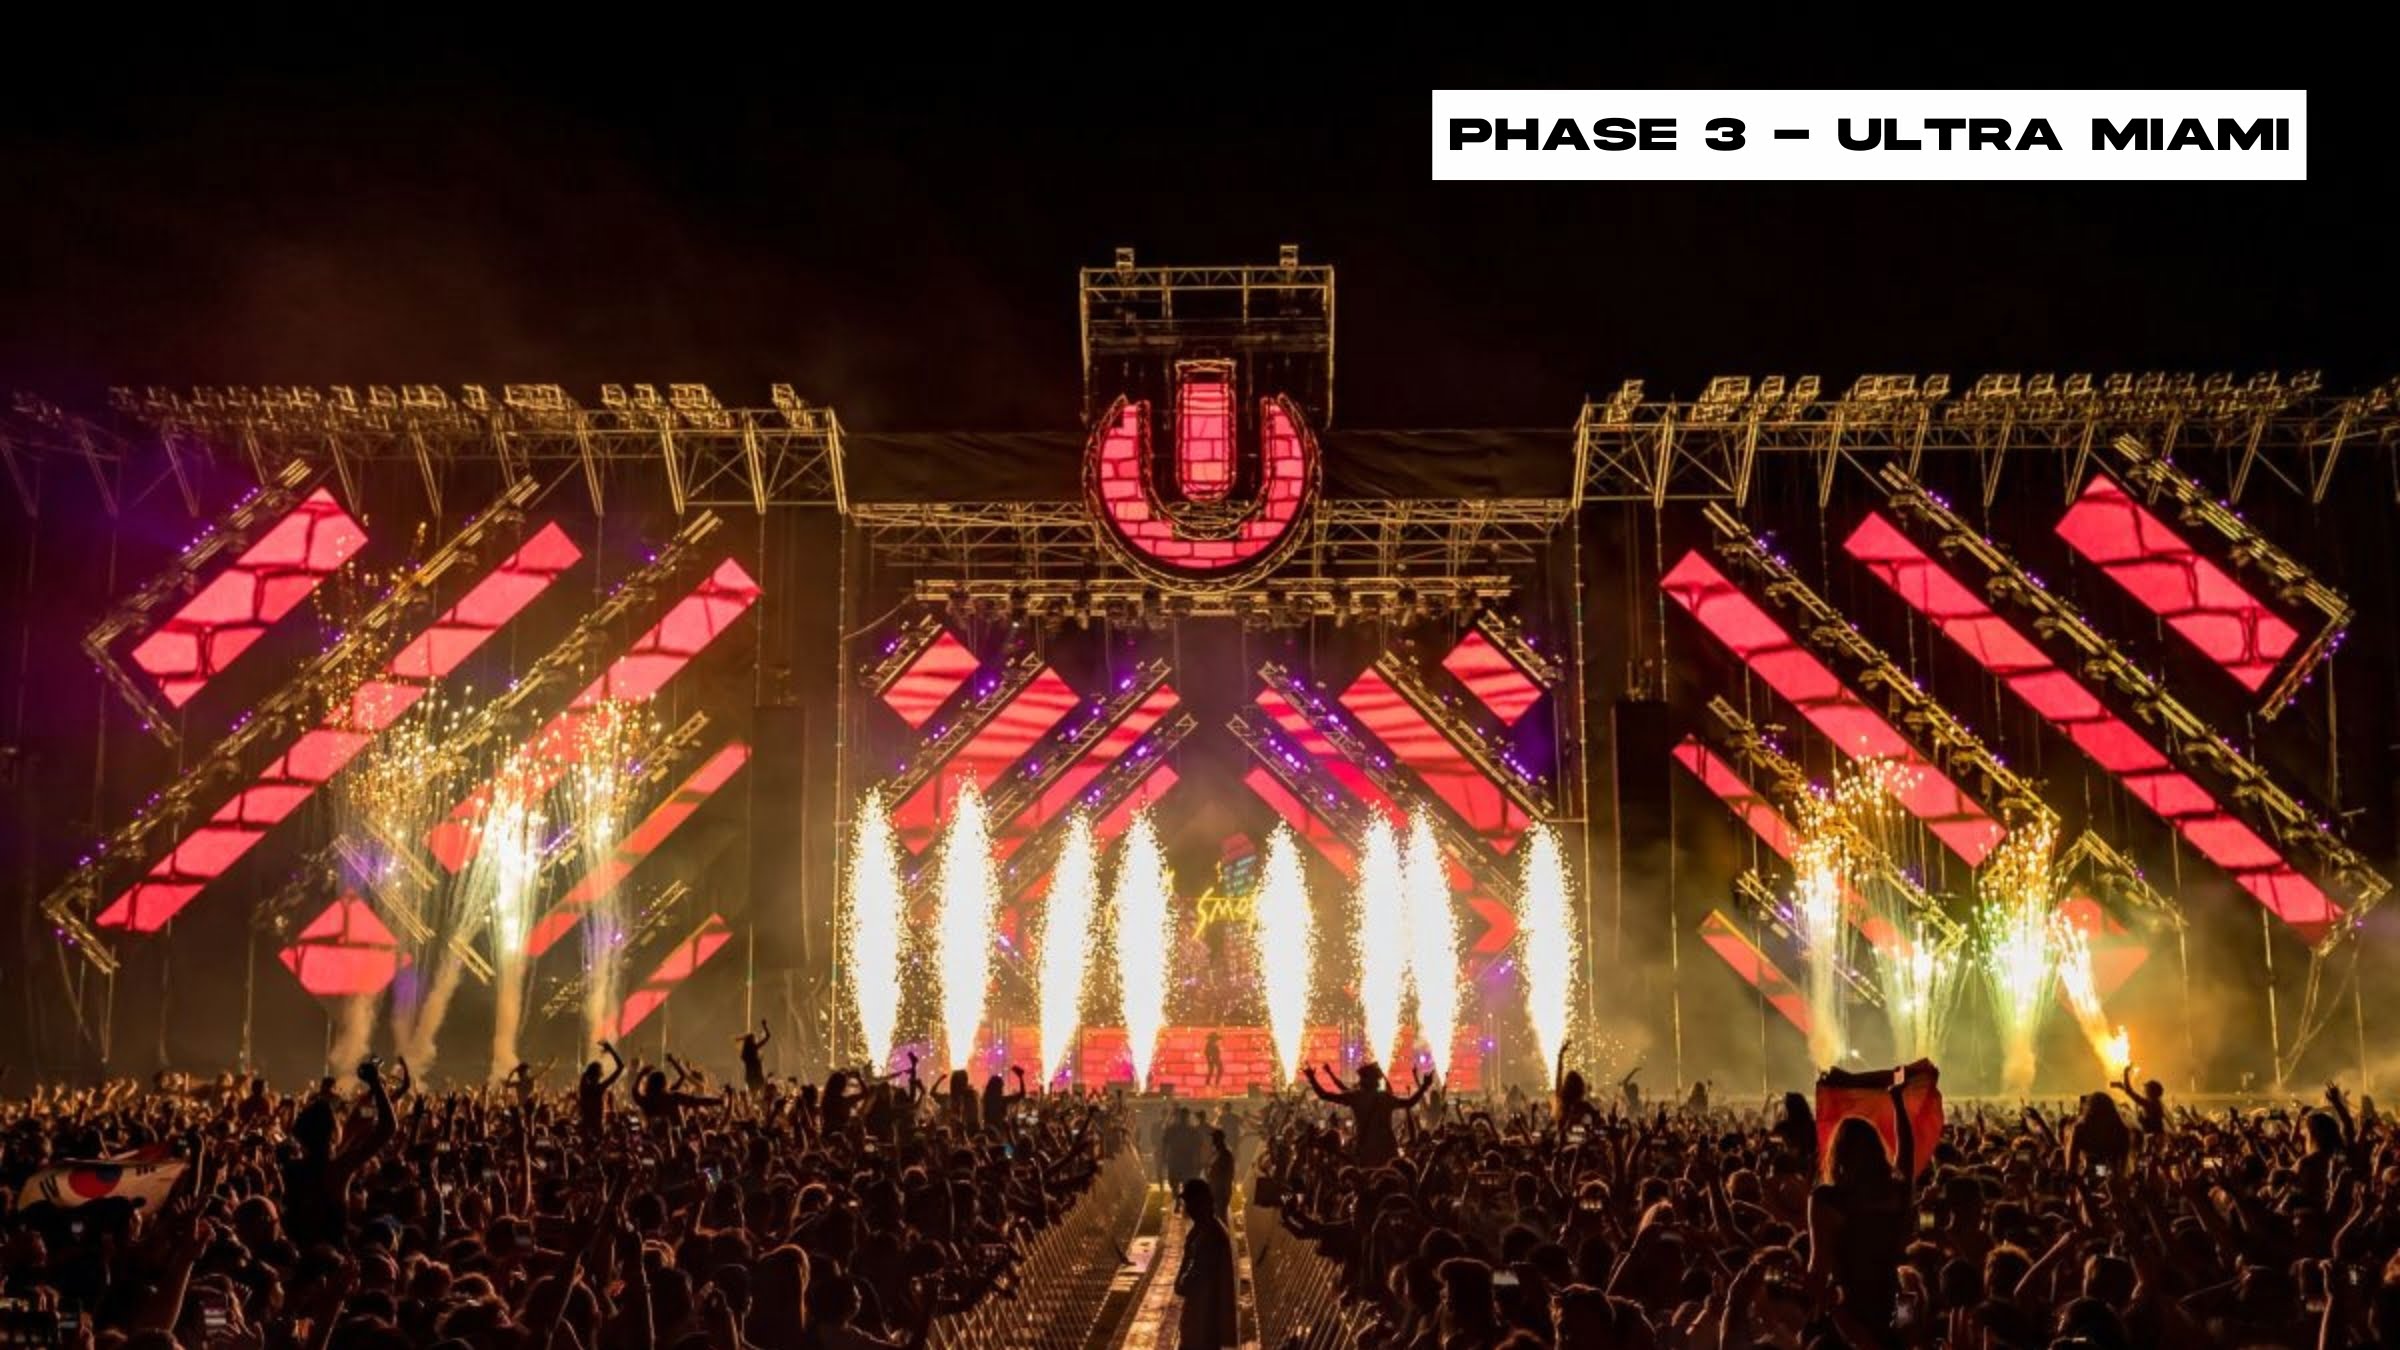 Ultra Music Festival Reveals Phase 3 Lineup Featuring More Than 180 Artists